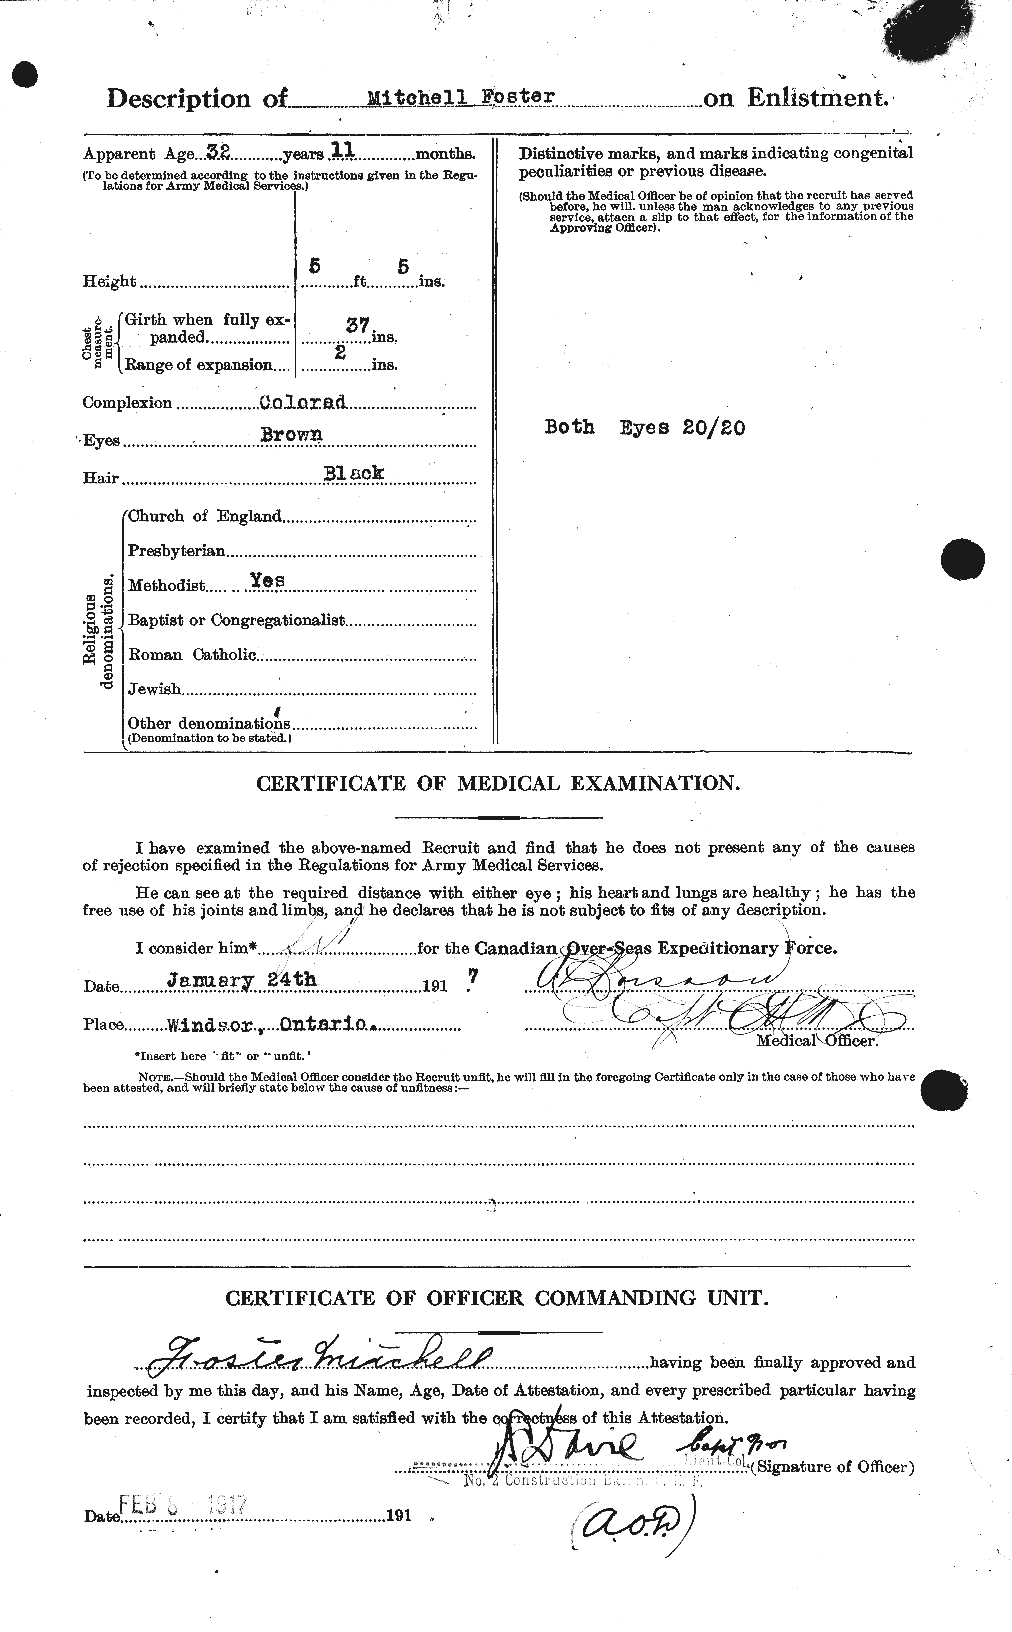 Personnel Records of the First World War - CEF 333429b